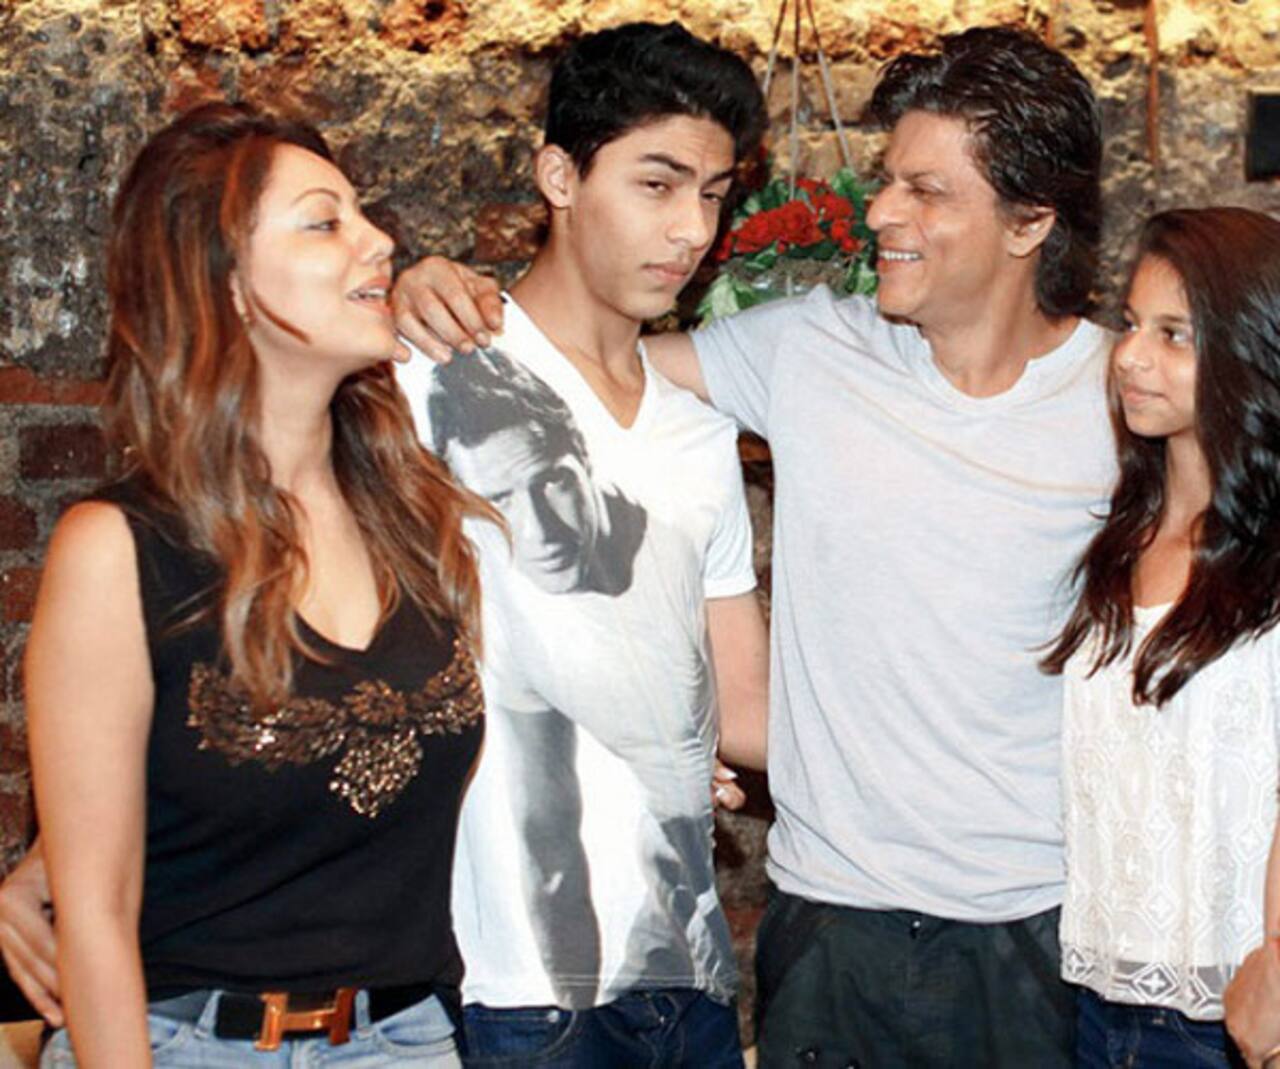 Big birthday and Diwali plans for Shah Rukh Khan and family at Mannat? Here’s how the family plans to celebrate [Exclusive]